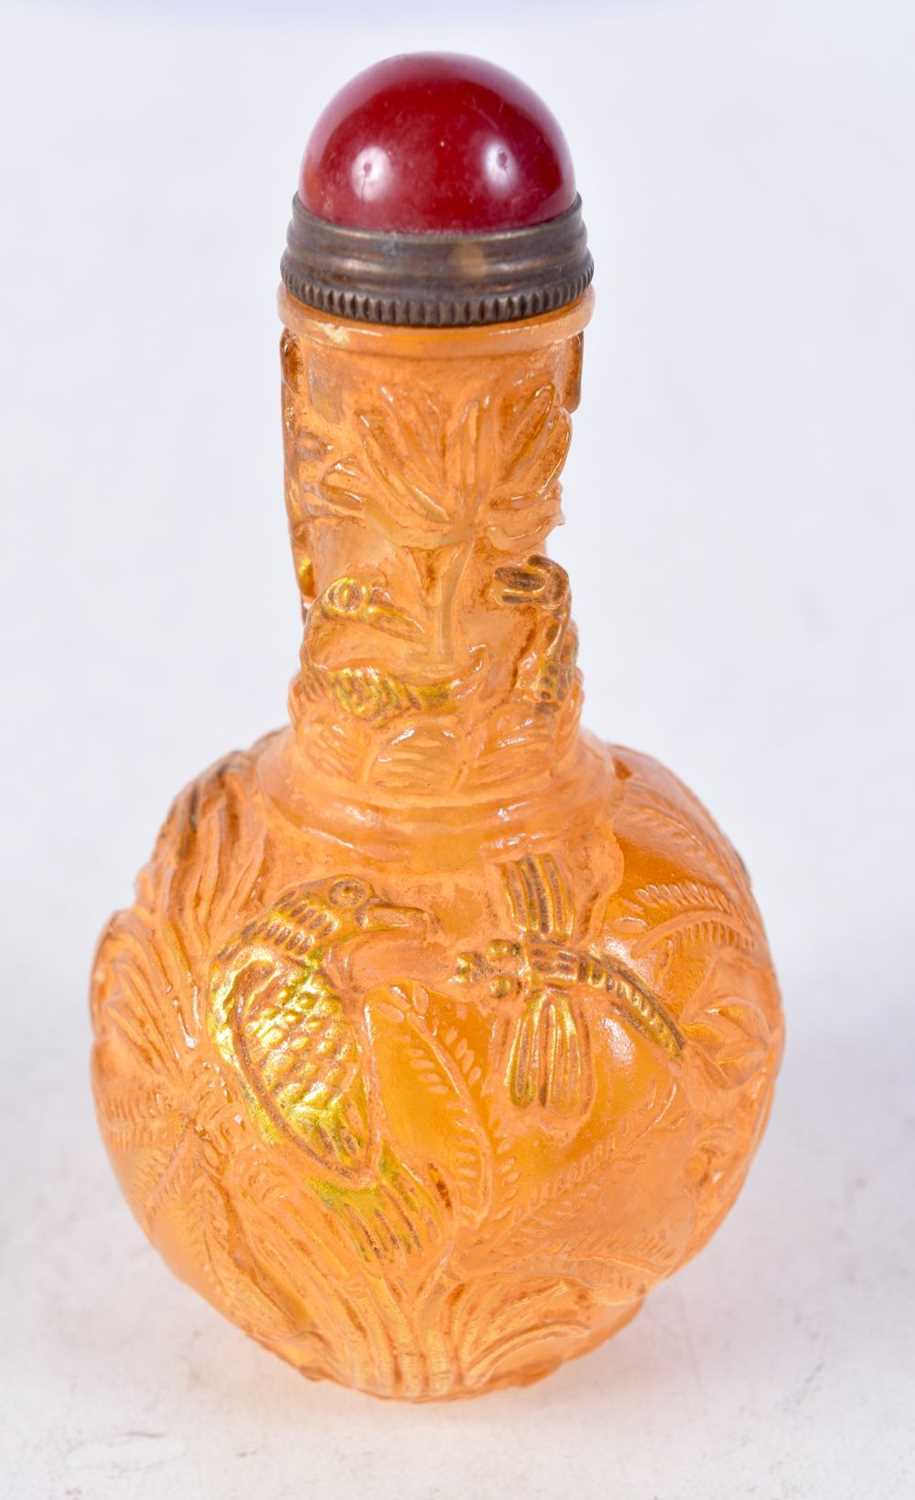 A PEKING GLASS SNUFF BOTTLE WITH A HARDSTONE STOPPER. 8.6cm x 4.4cm